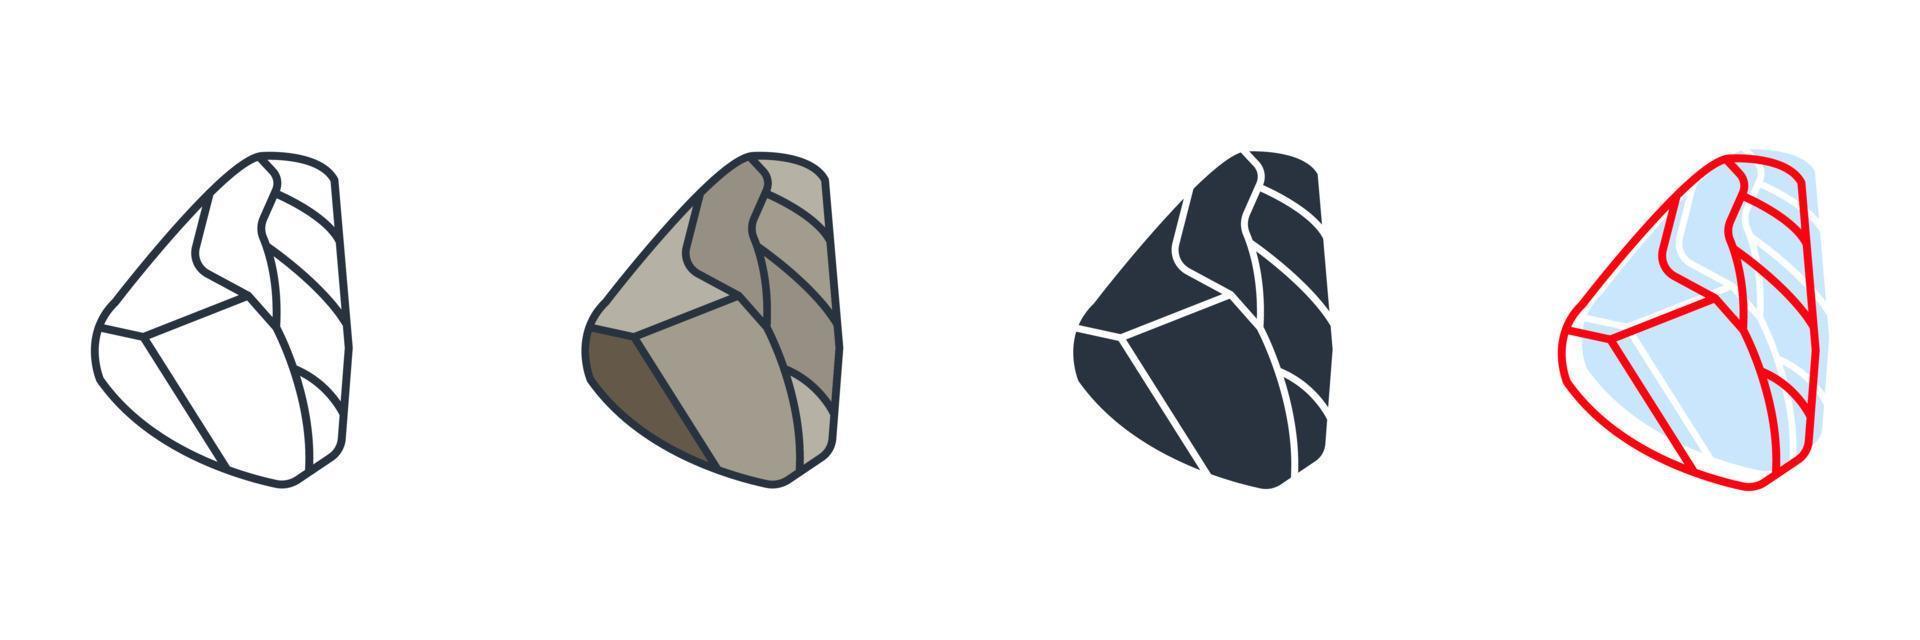 geology icon logo vector illustration. stone symbol template for graphic and web design collection